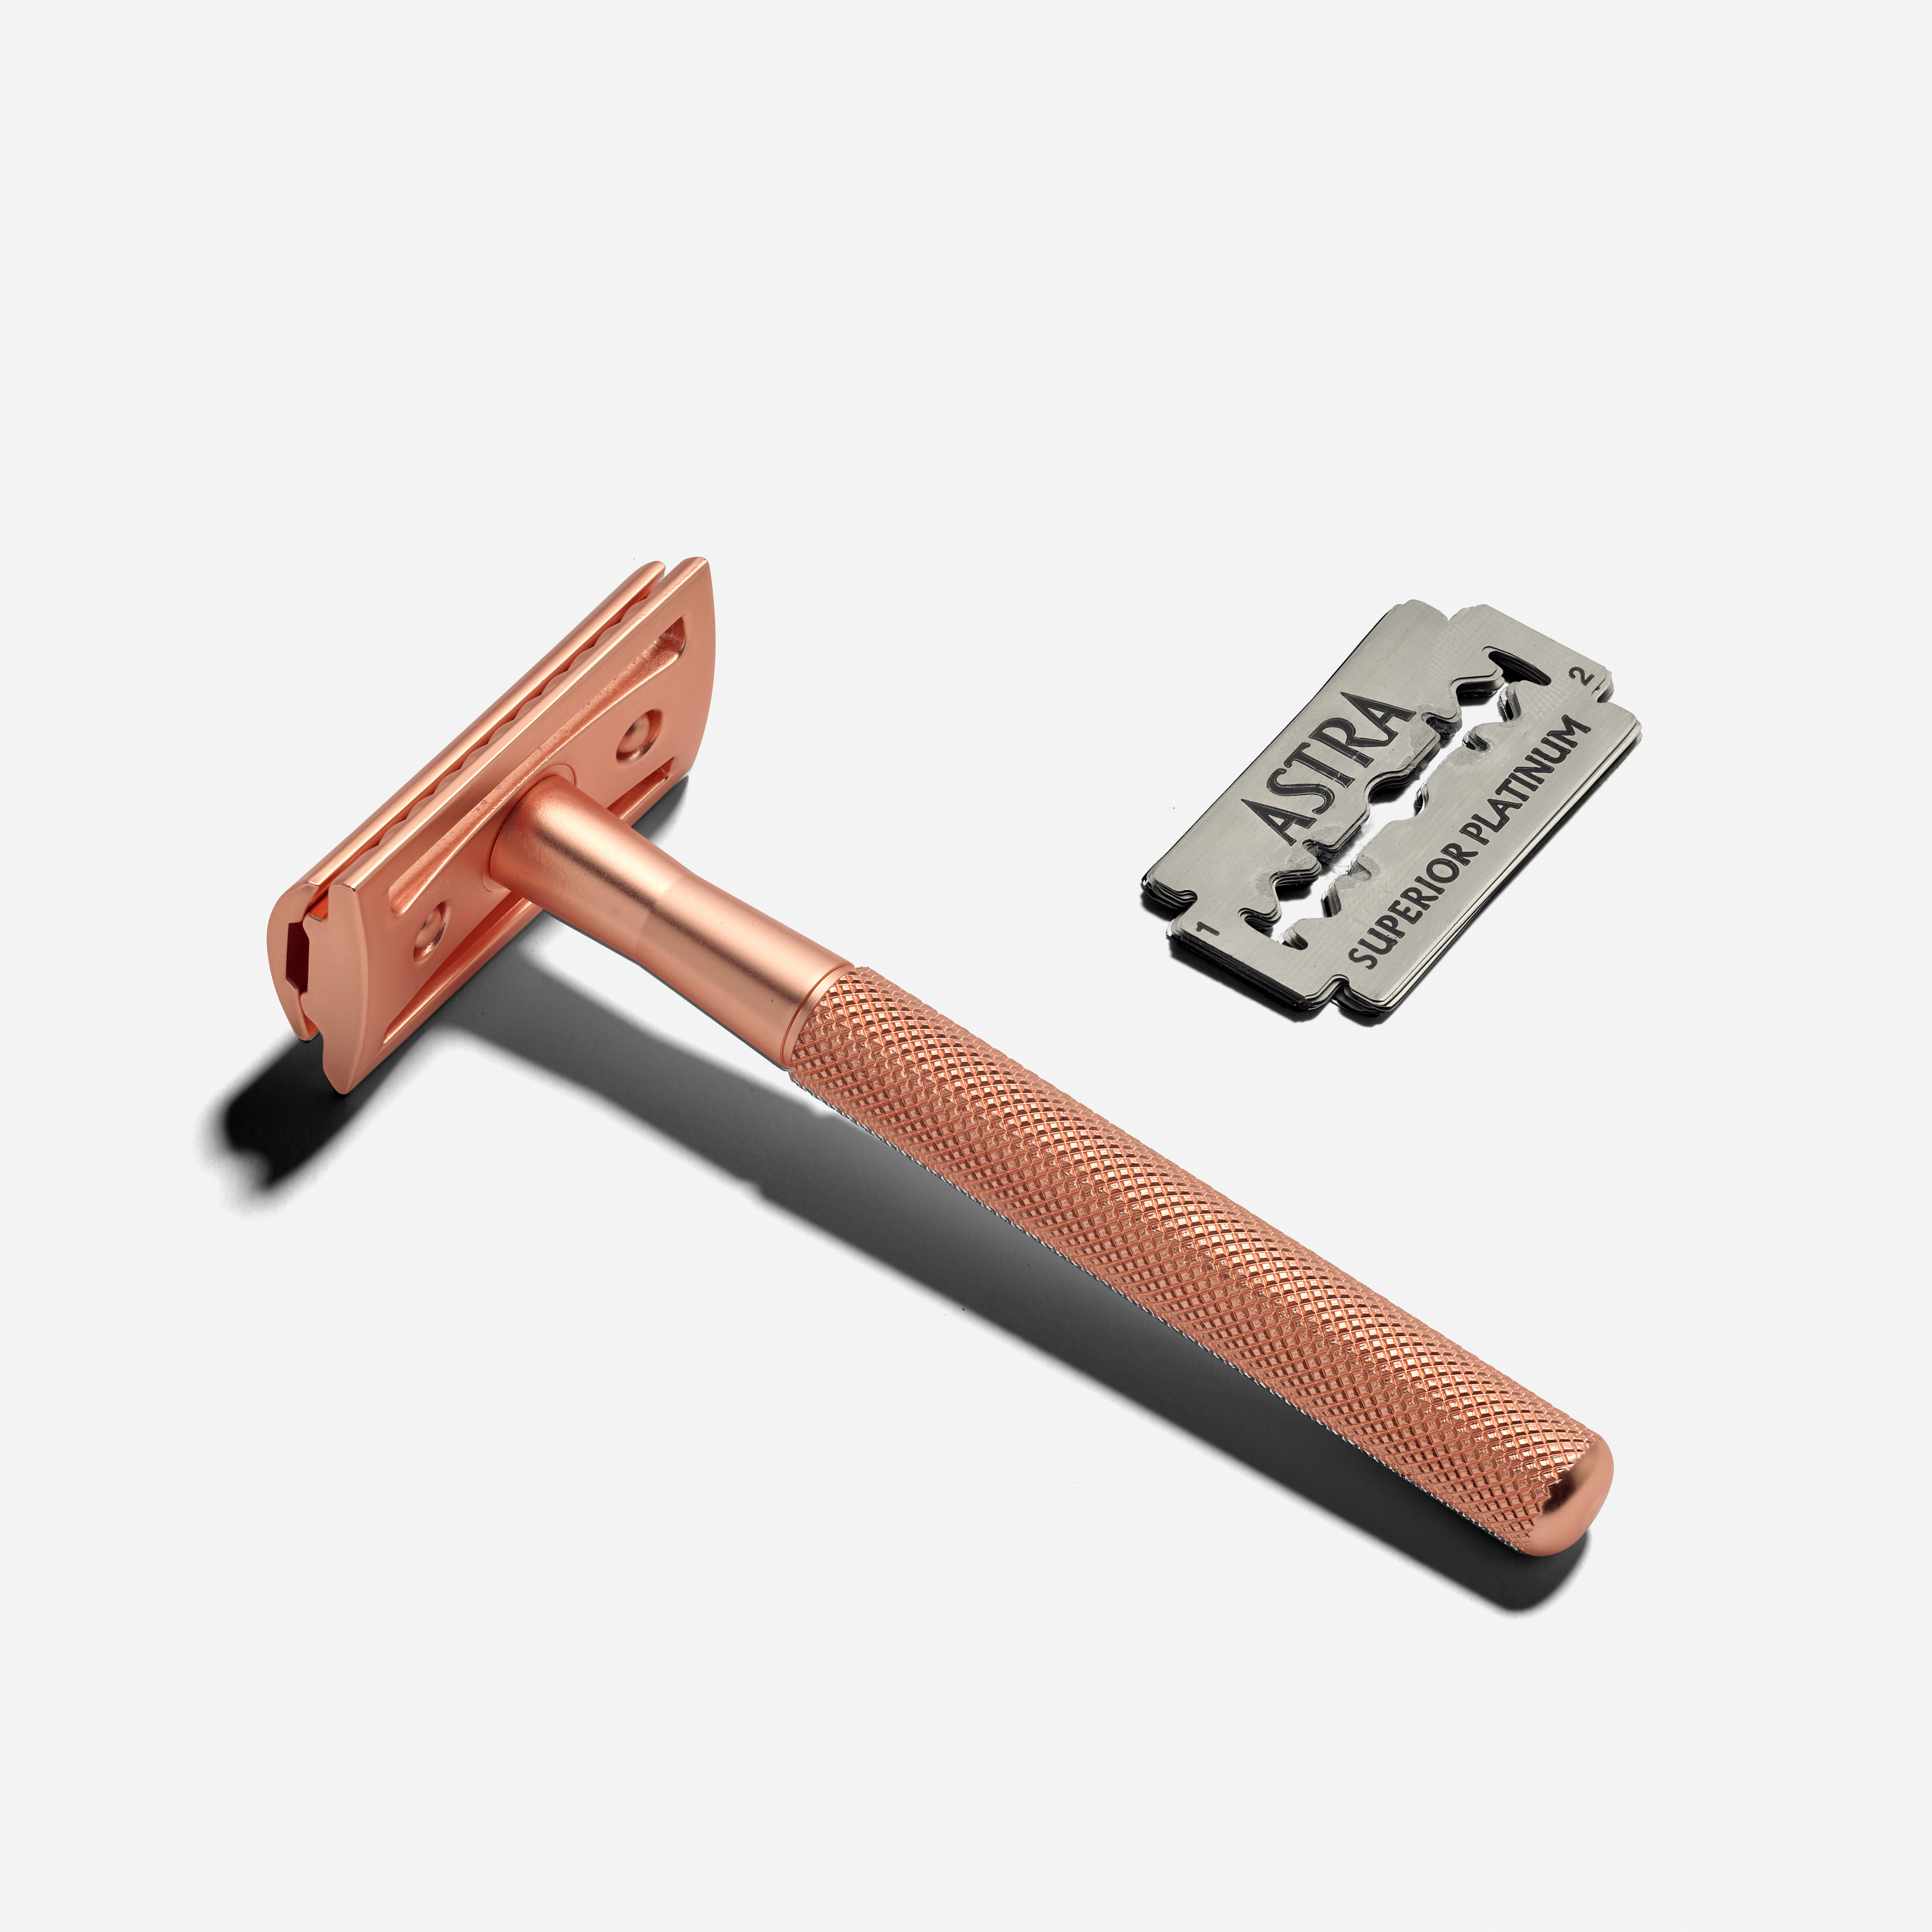 Zero Waste Club - Reusable Stainless Steel Razor (Rose Gold) - 10 Blades Included